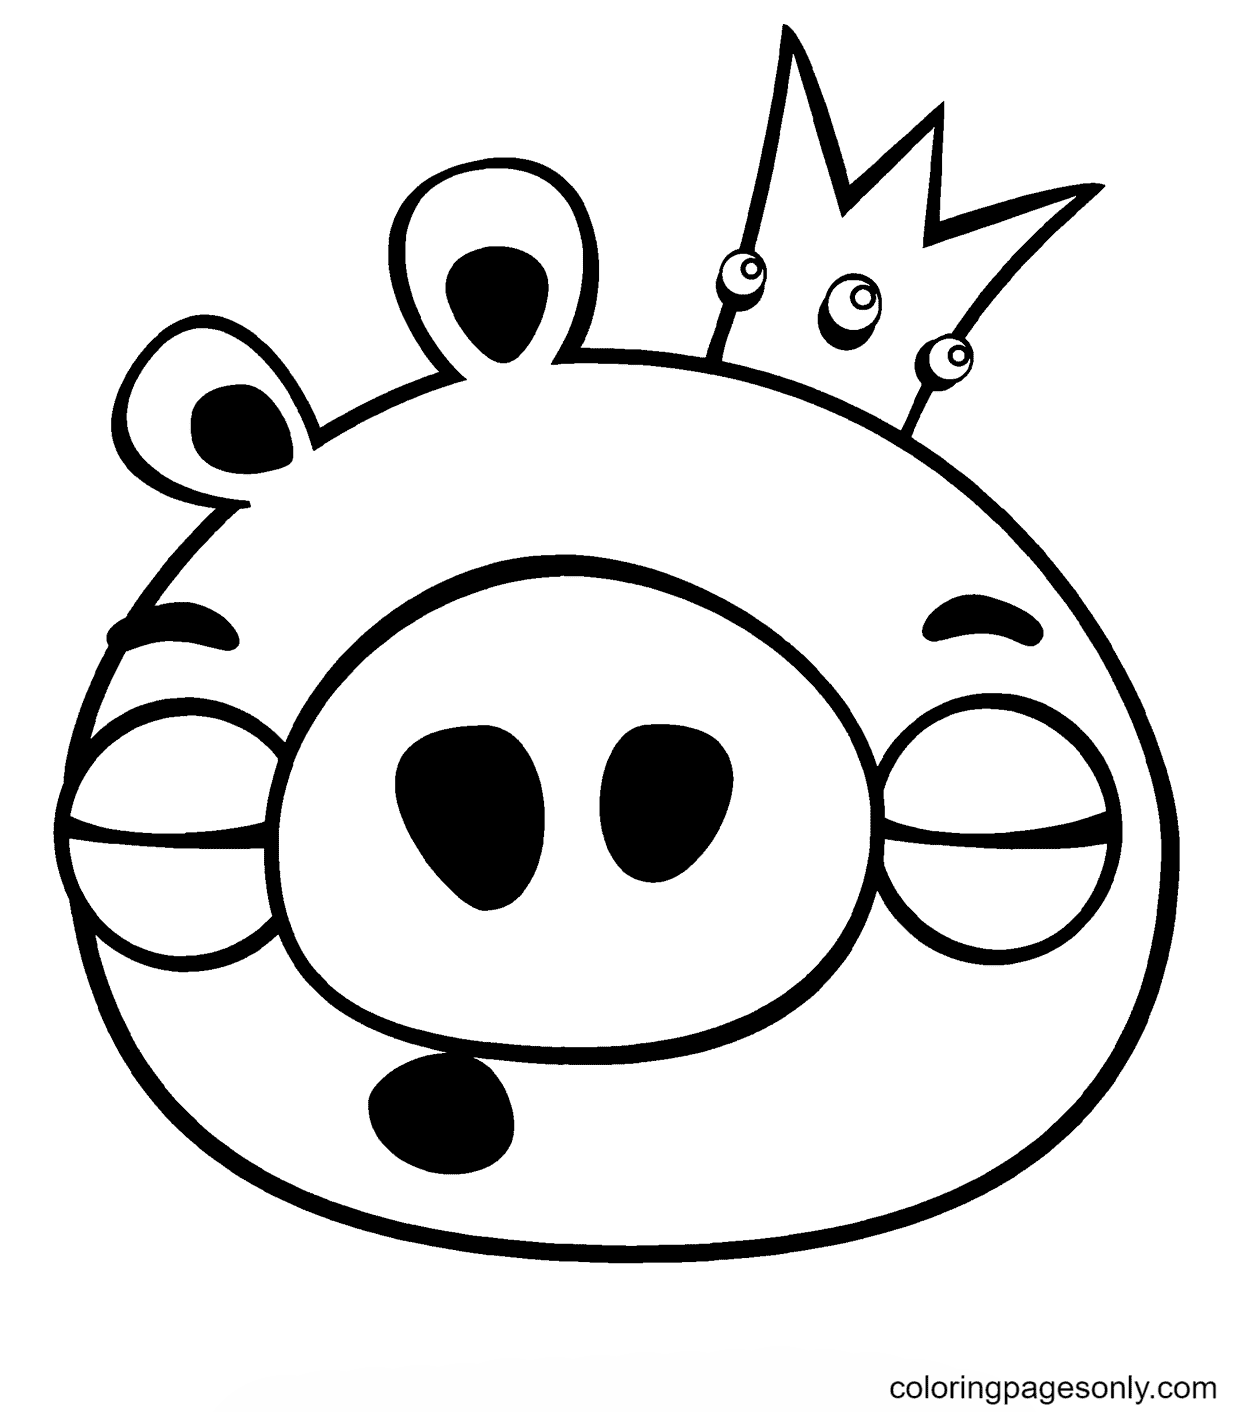 King Pig is Sleeping Coloring Pages